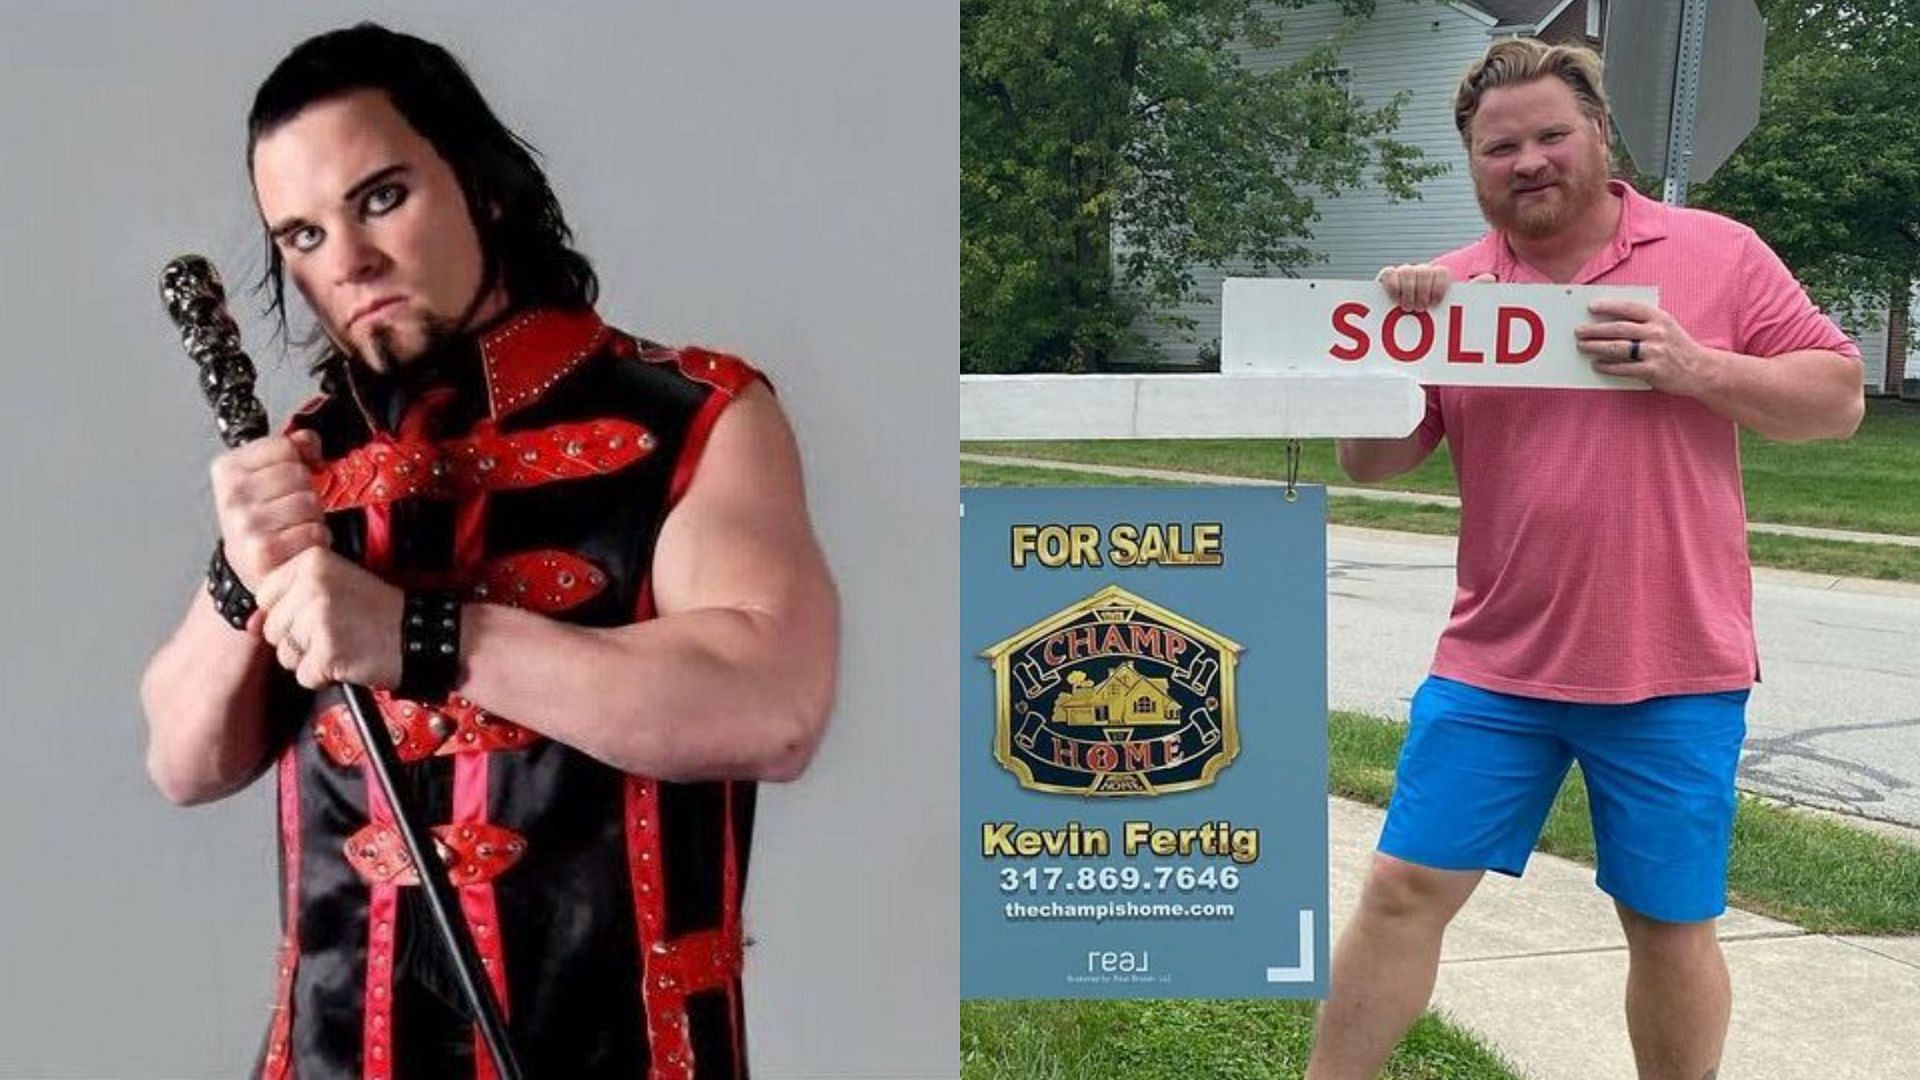 Kevin Thorn is now a real estate agent and independent wrestler